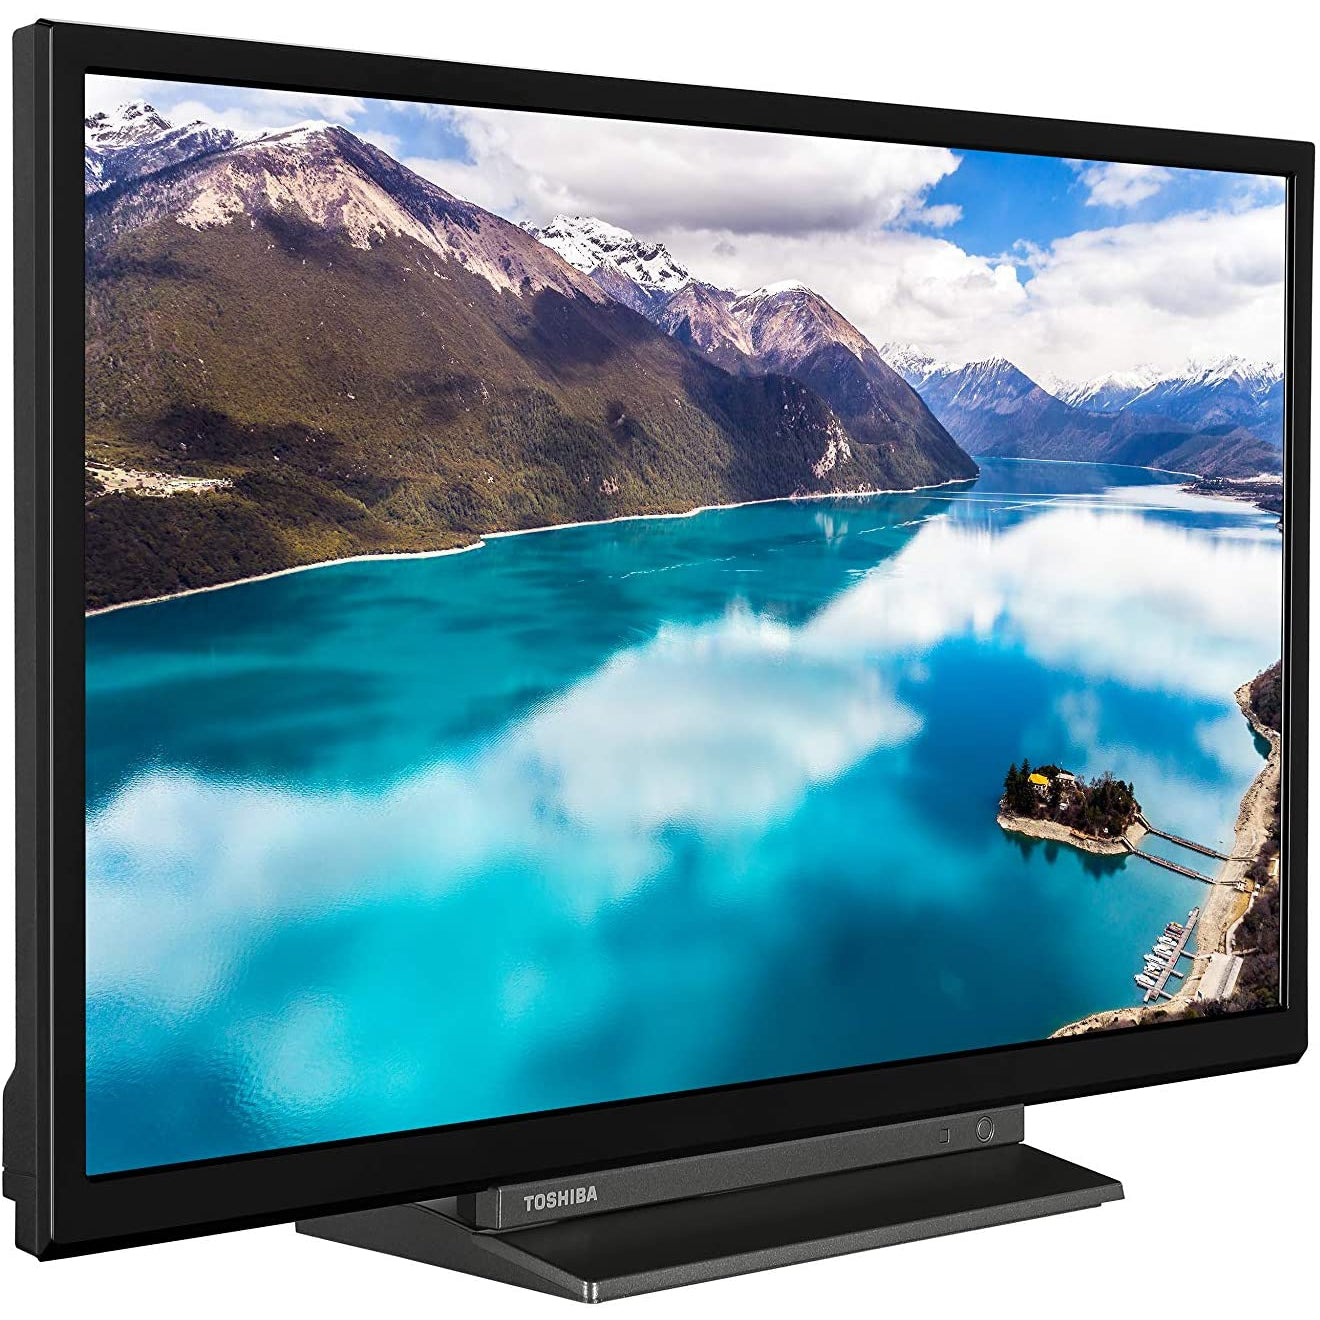 Toshiba 24WD3A63DB 24" Smart HD TV with Freeview Play & DVD Player